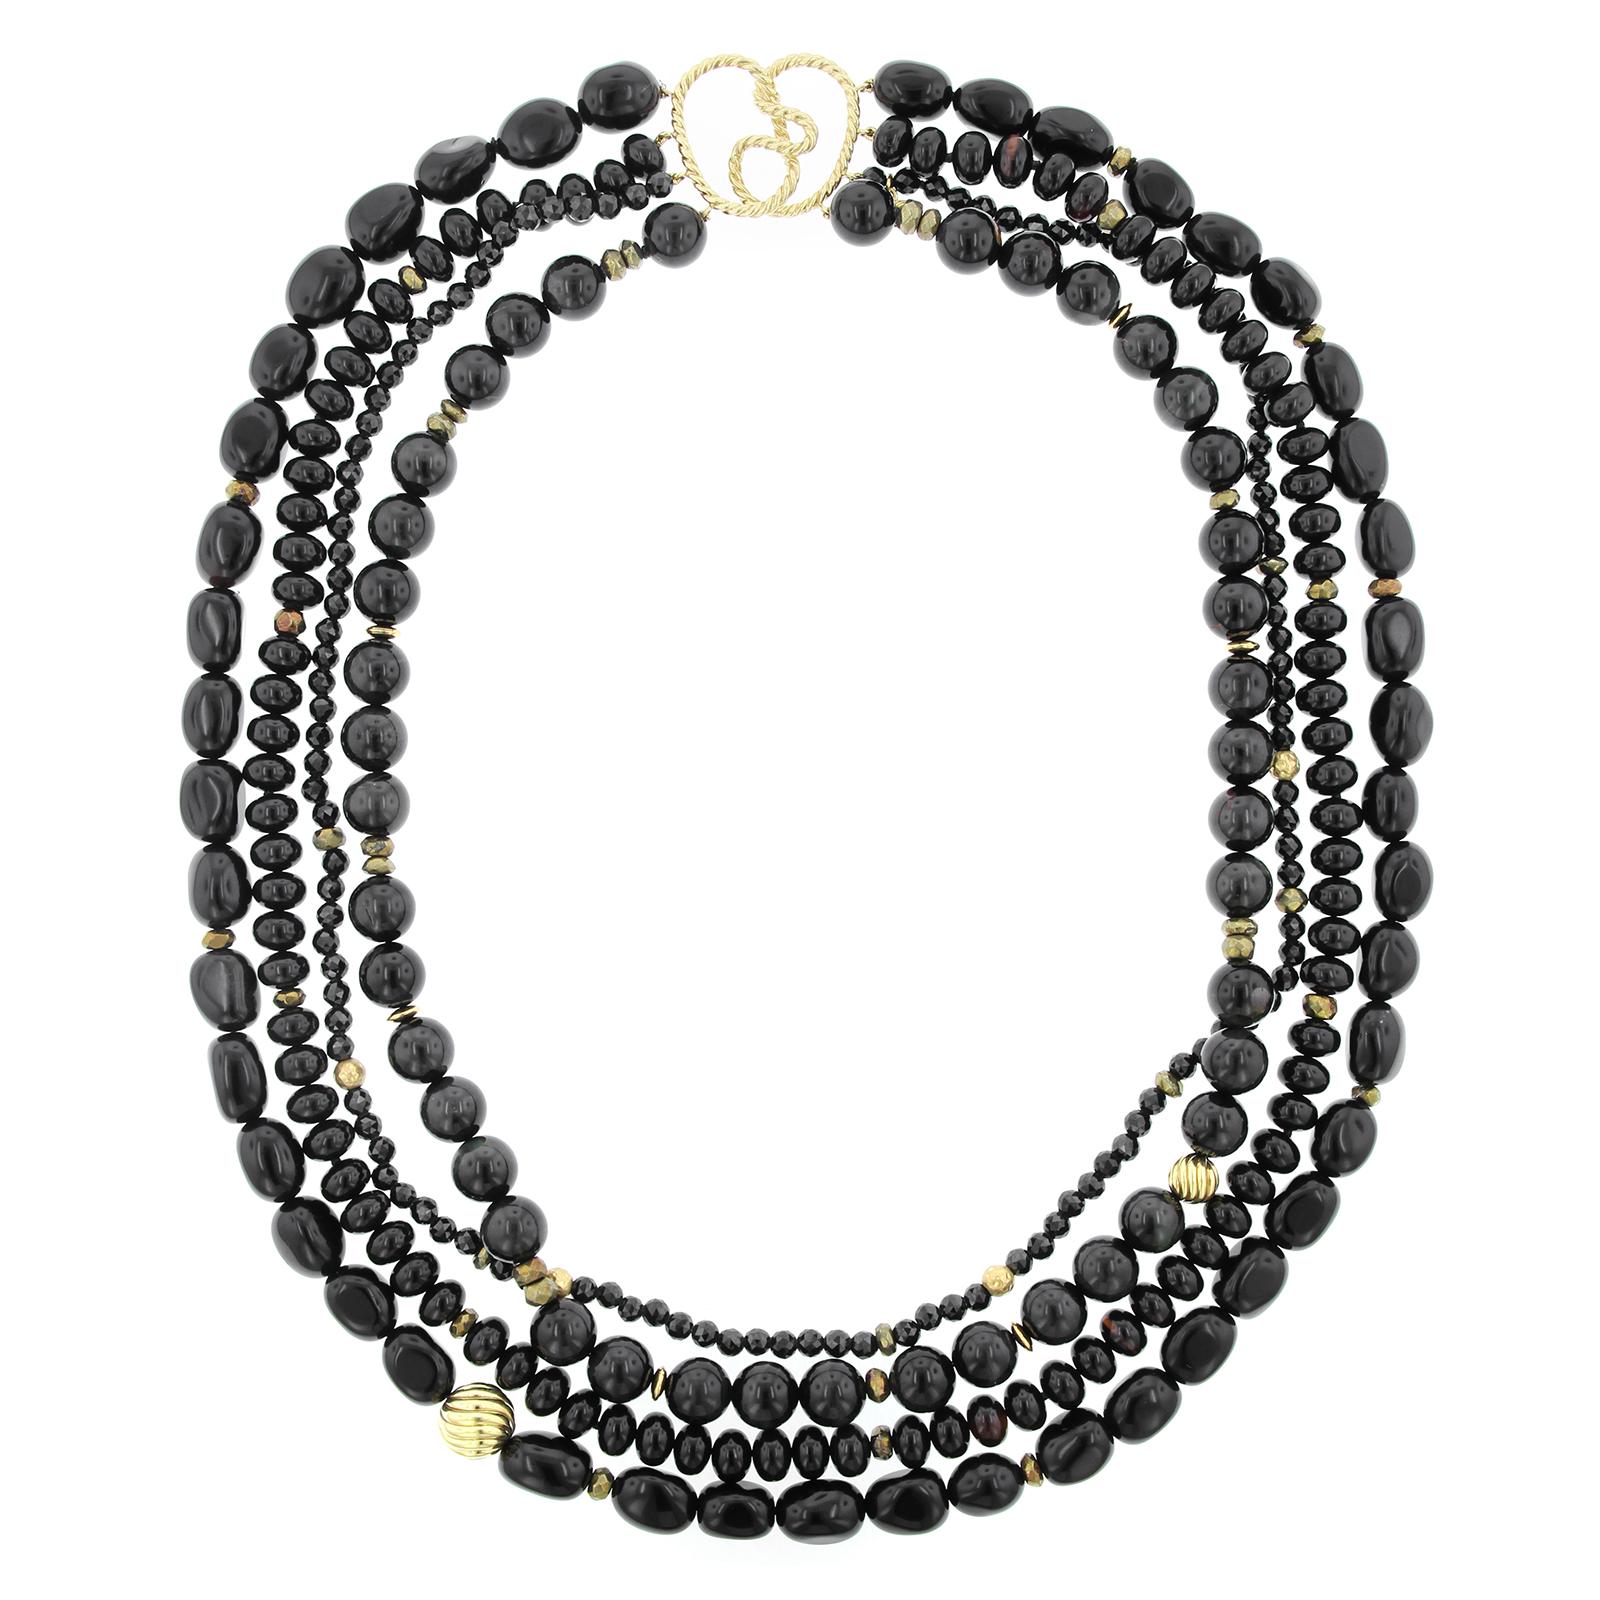 David Yurman Couture 18 Karat Yellow Gold Black Onyx and Obsidian Bead Necklace For Sale